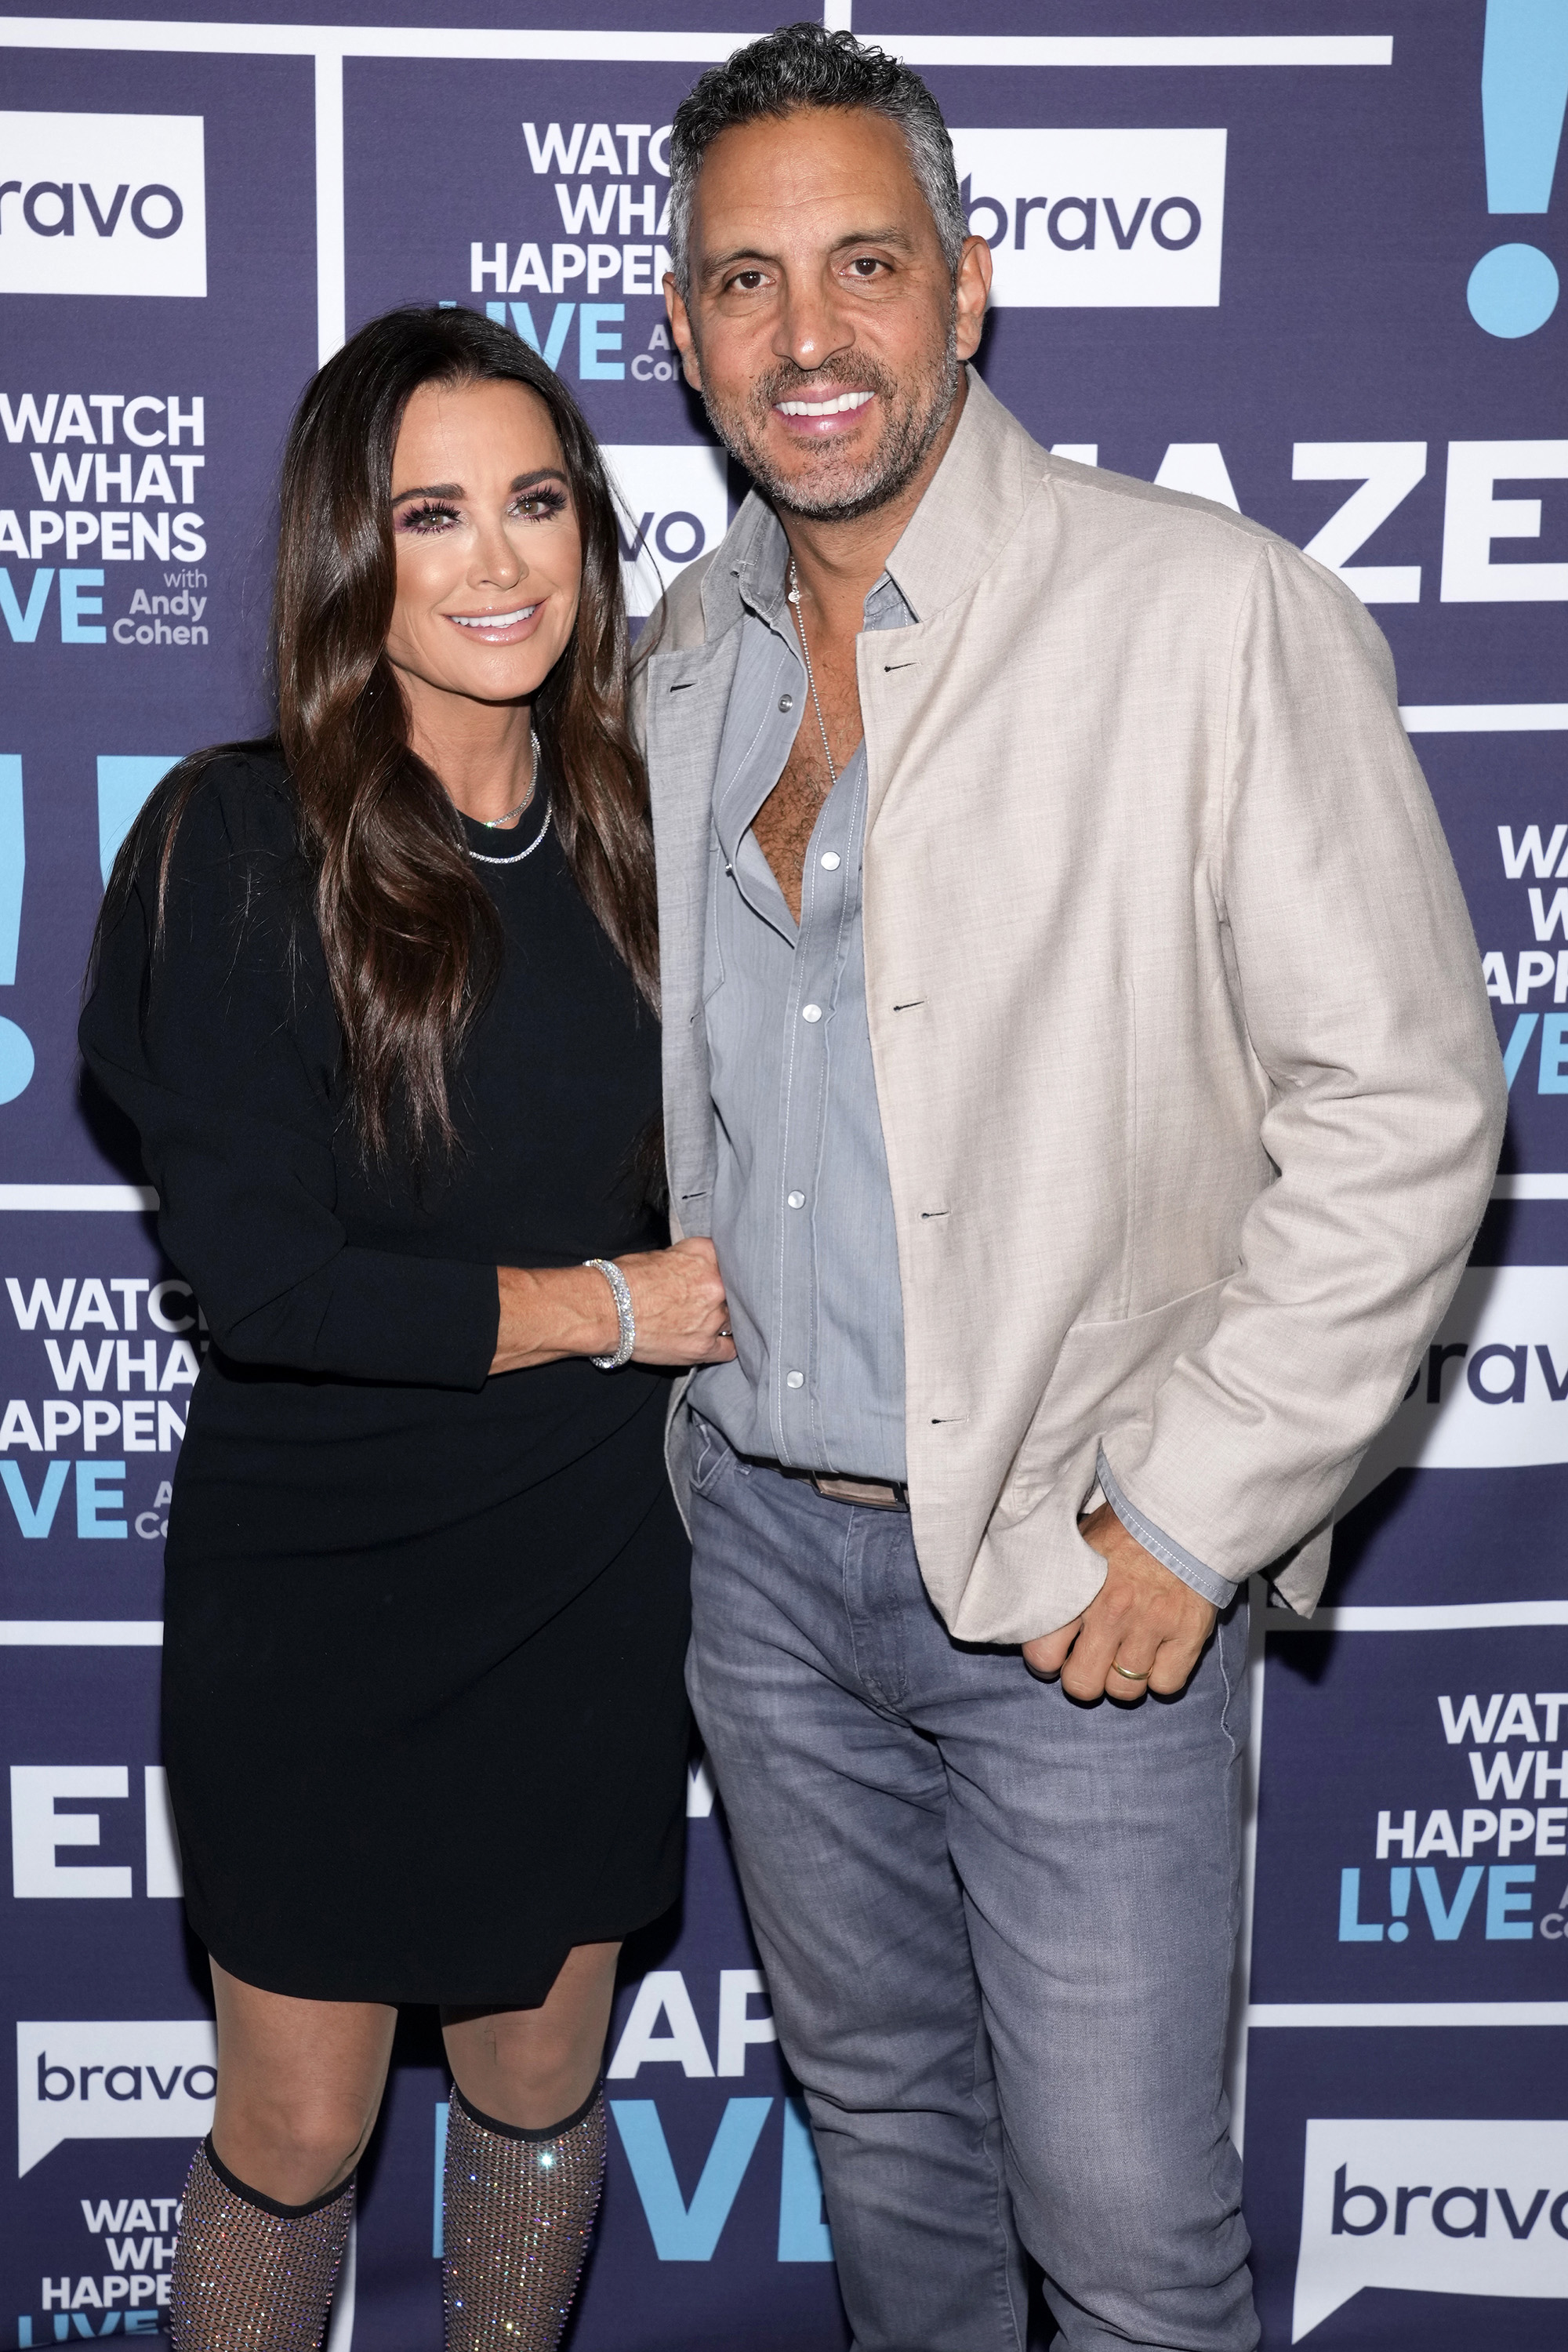 At the time, Mauricio's now ex-wife, Kyle Richards, was 100 percent supportive of him leaving the firm and starting his own, even though it might've caused stress between them